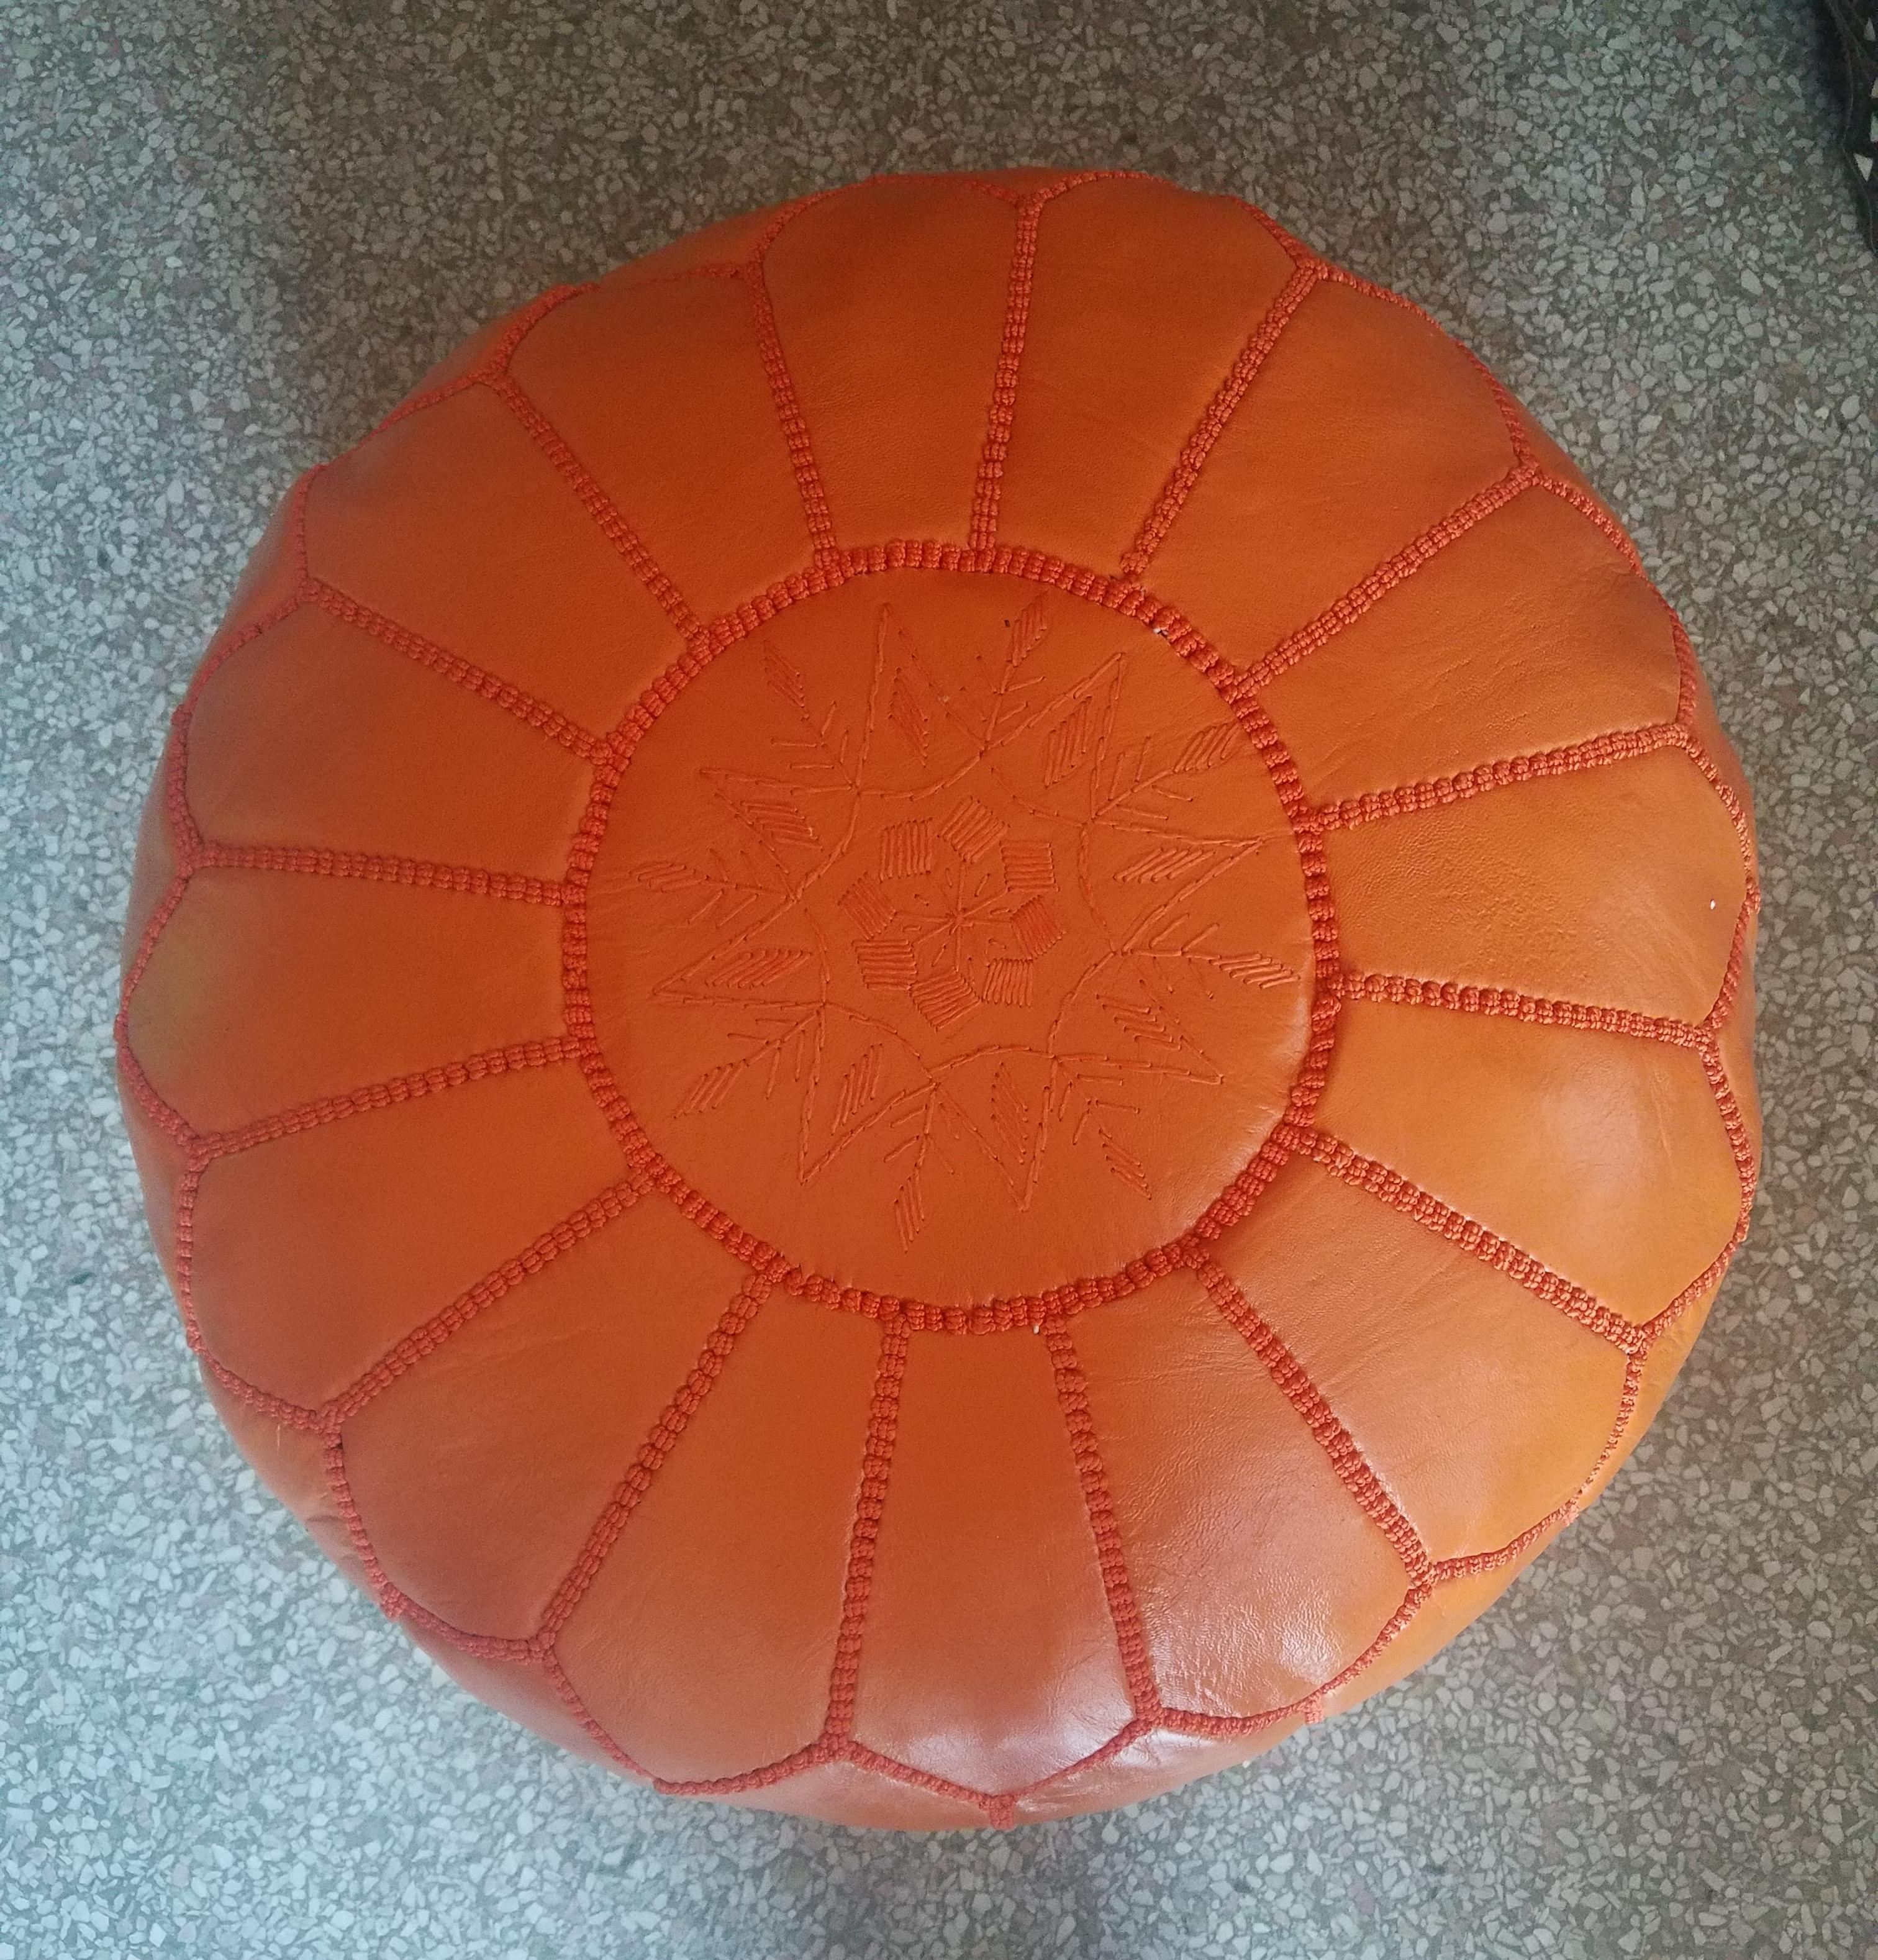 Moroccan Leather Pouf or Ottoman, Pale Orange In Excellent Condition For Sale In Orlando, FL